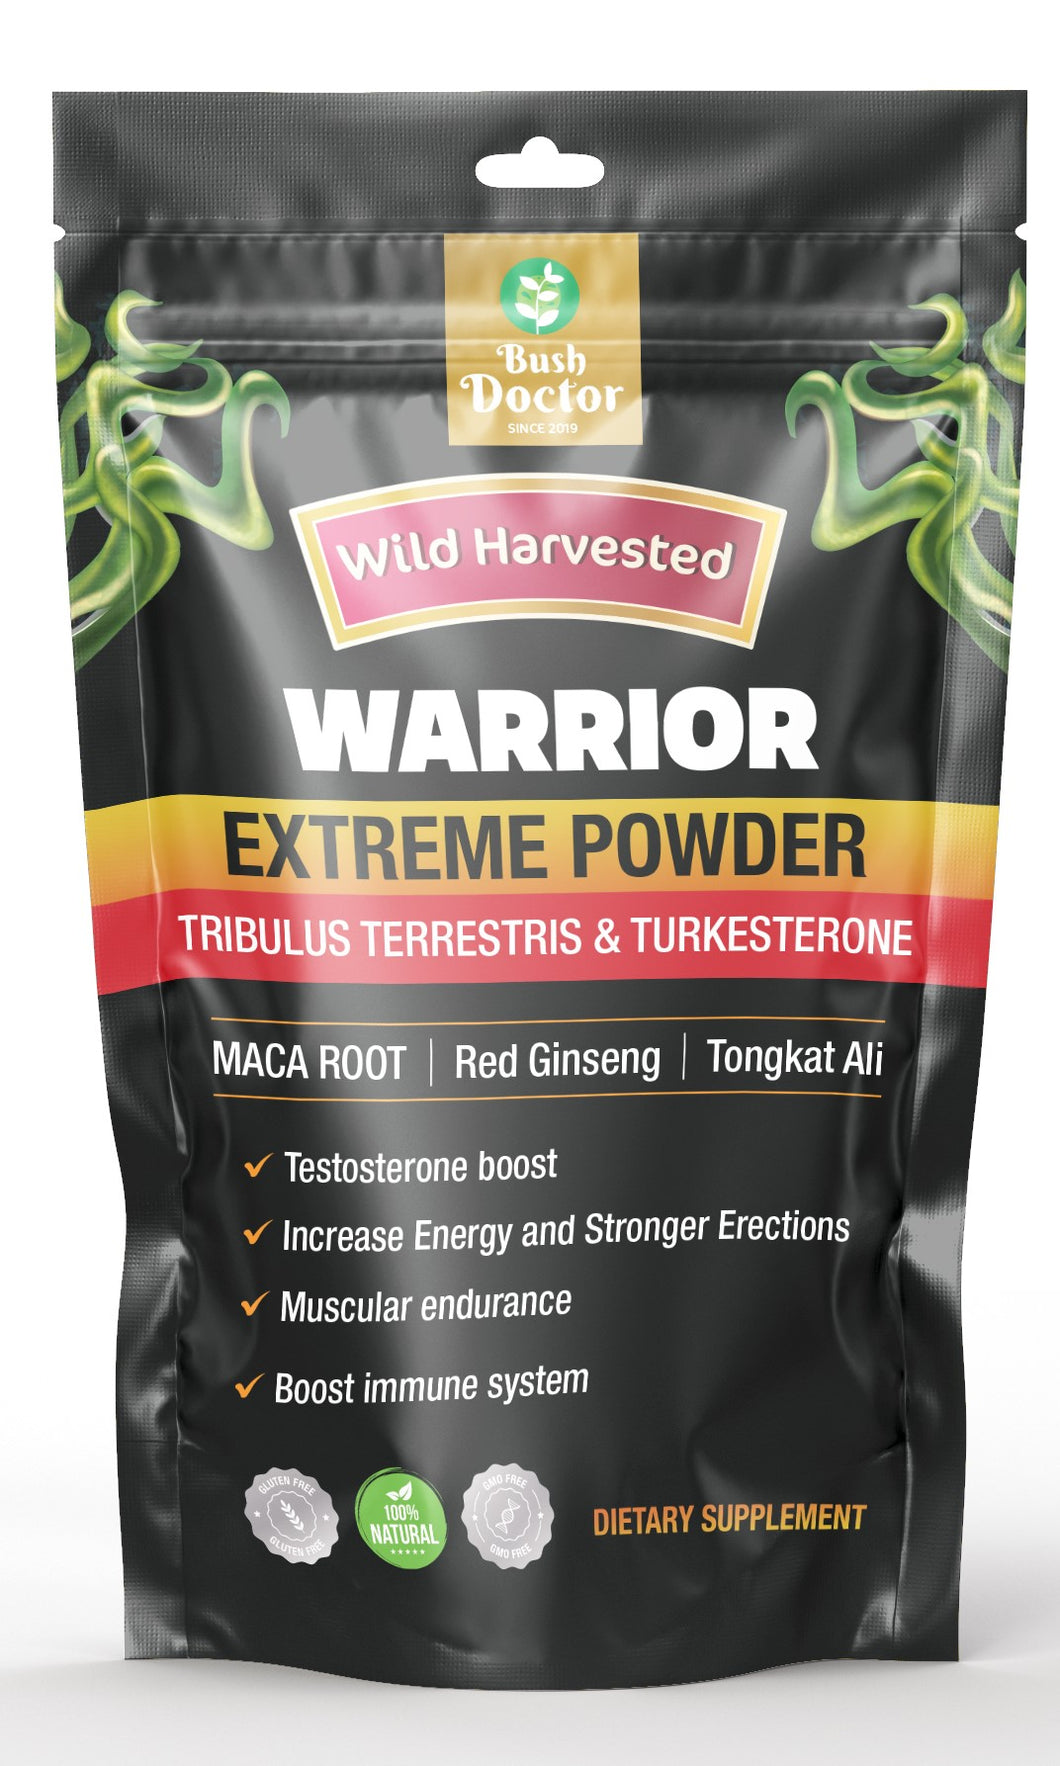 Unleash Your Inner Warrior with Bush Doctor - Warrior Extreme Powder: Elevate Performance, Boost Strength, and Conquer Challenges!